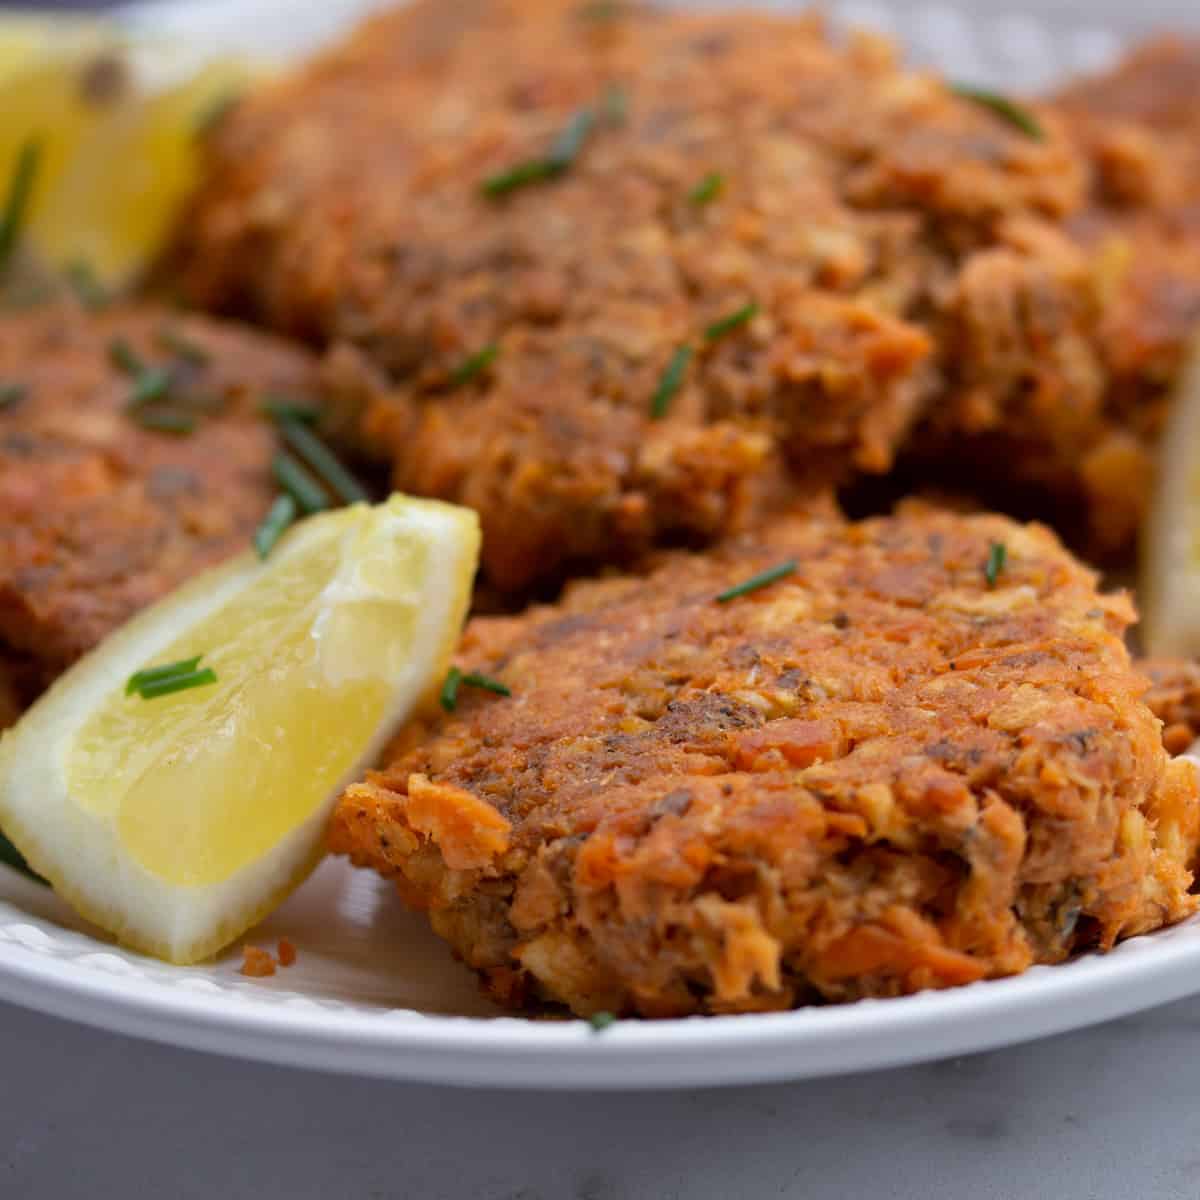 How To Make Old-Fashioned Salmon Patties